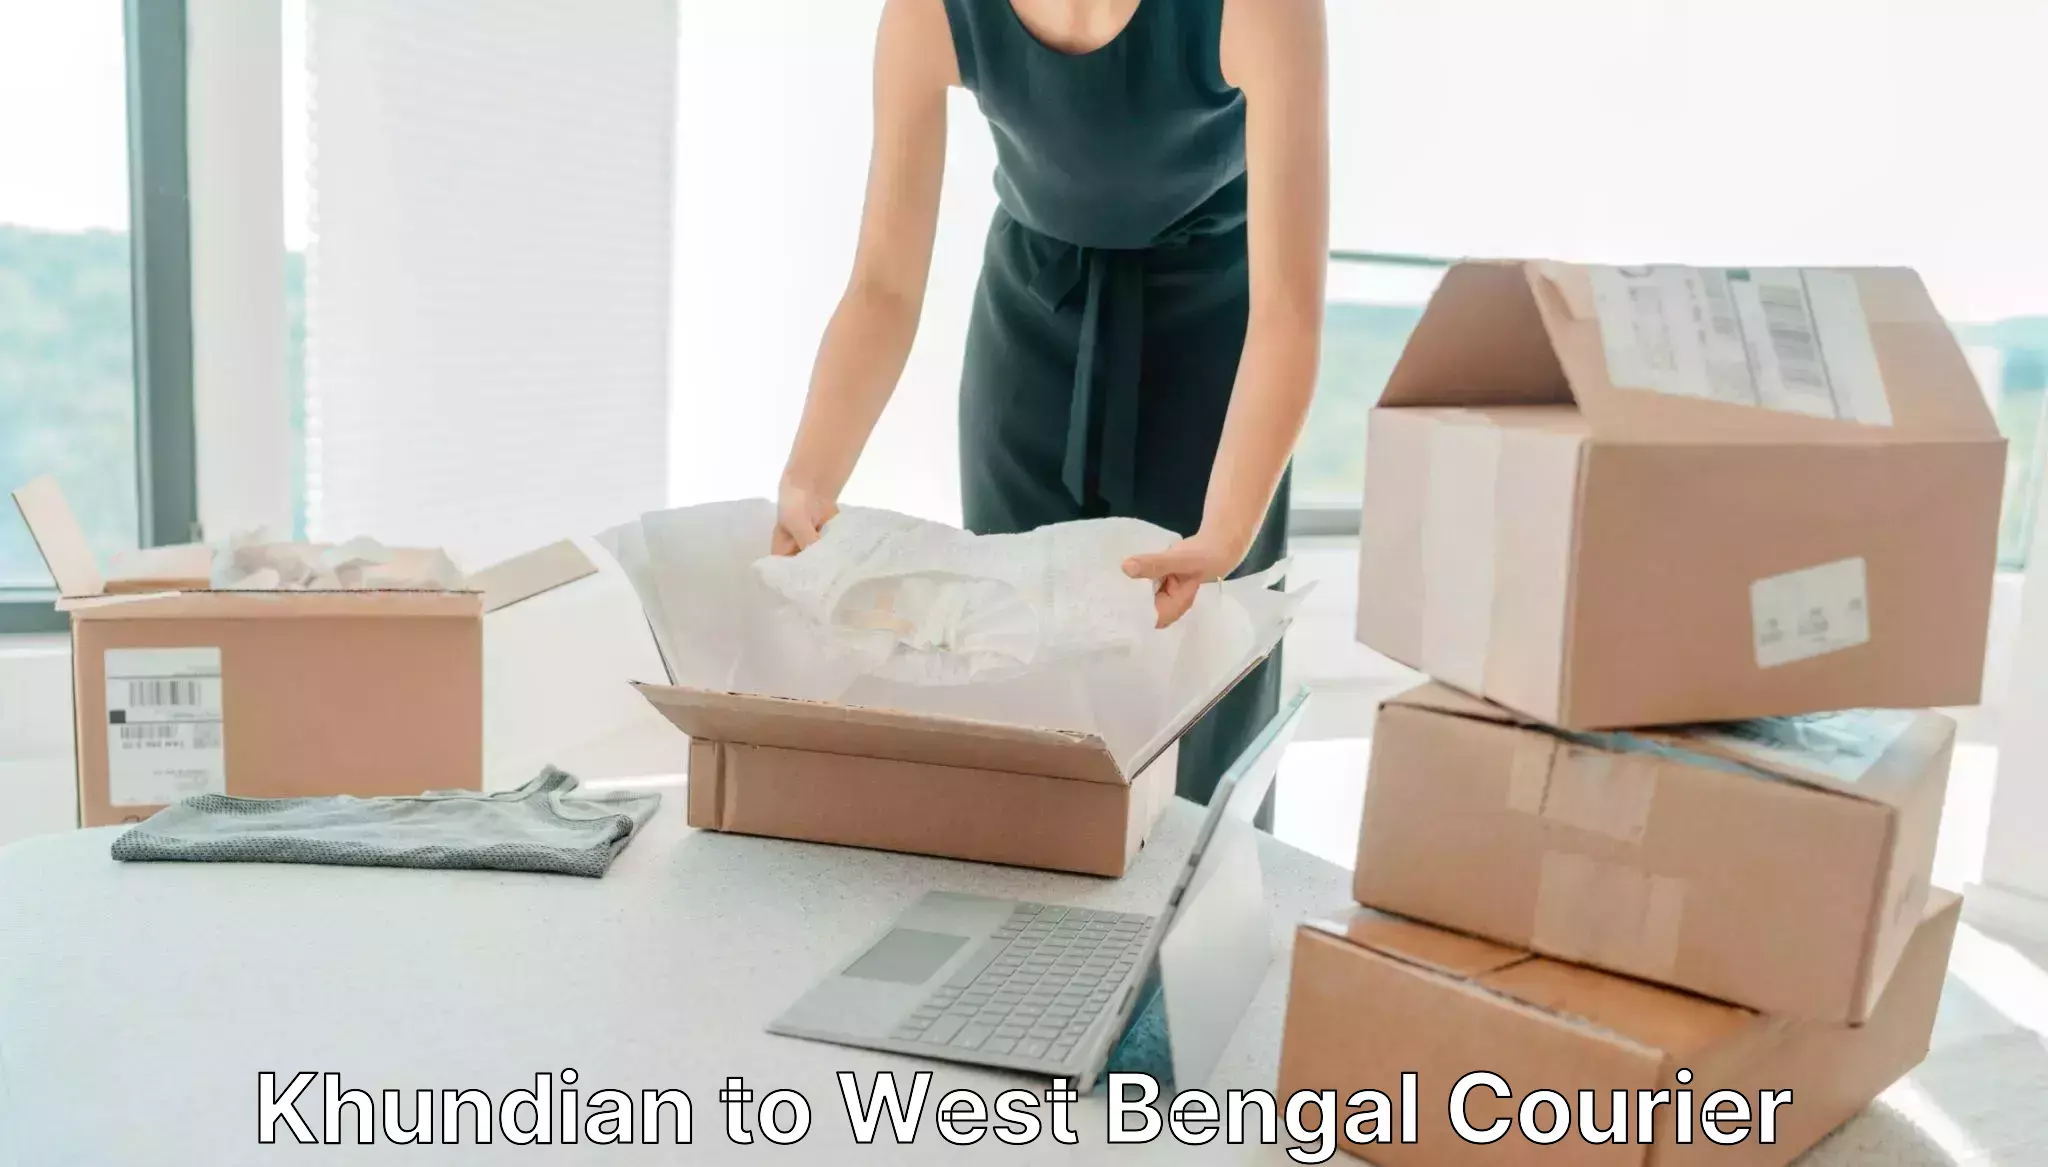 Nationwide delivery network Khundian to West Bengal